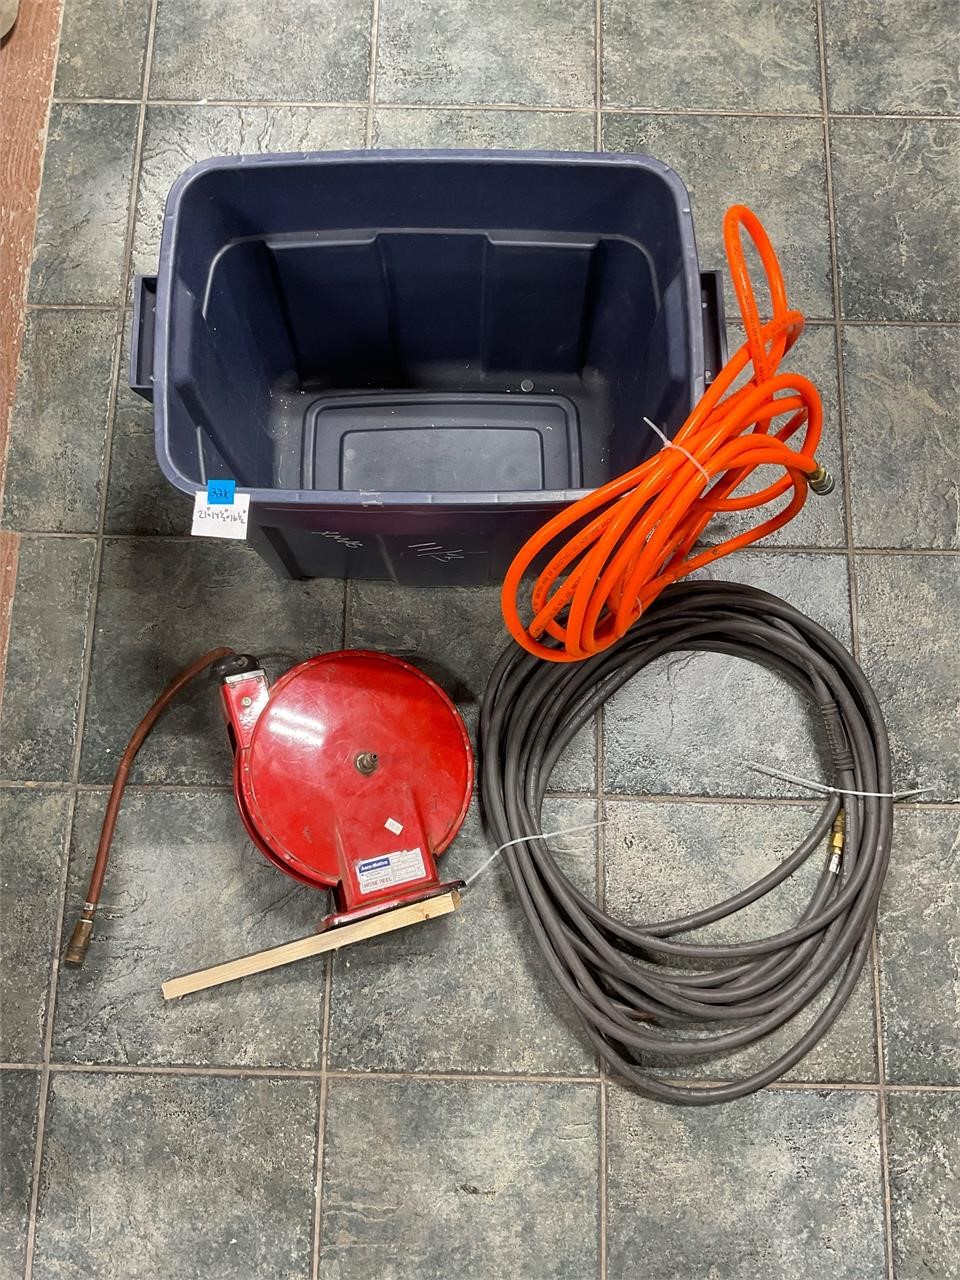 200 PSI Hose Reel, Hoses, and Tote